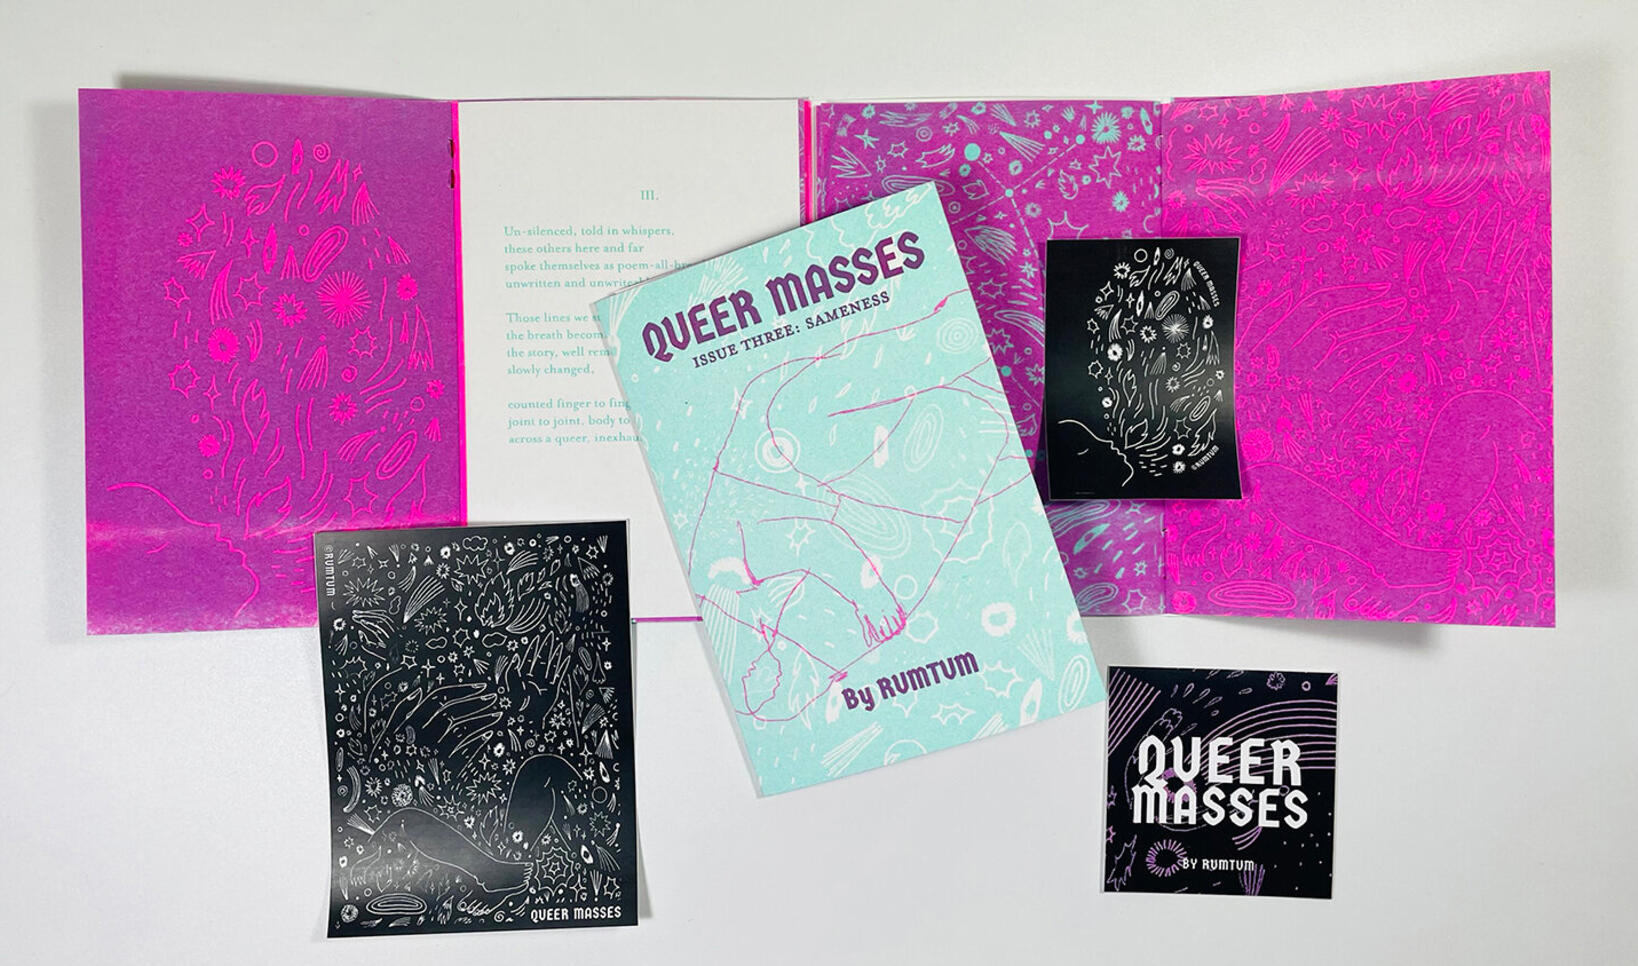 The zine "Queer Masses" is displayed with several other merchandise items around it